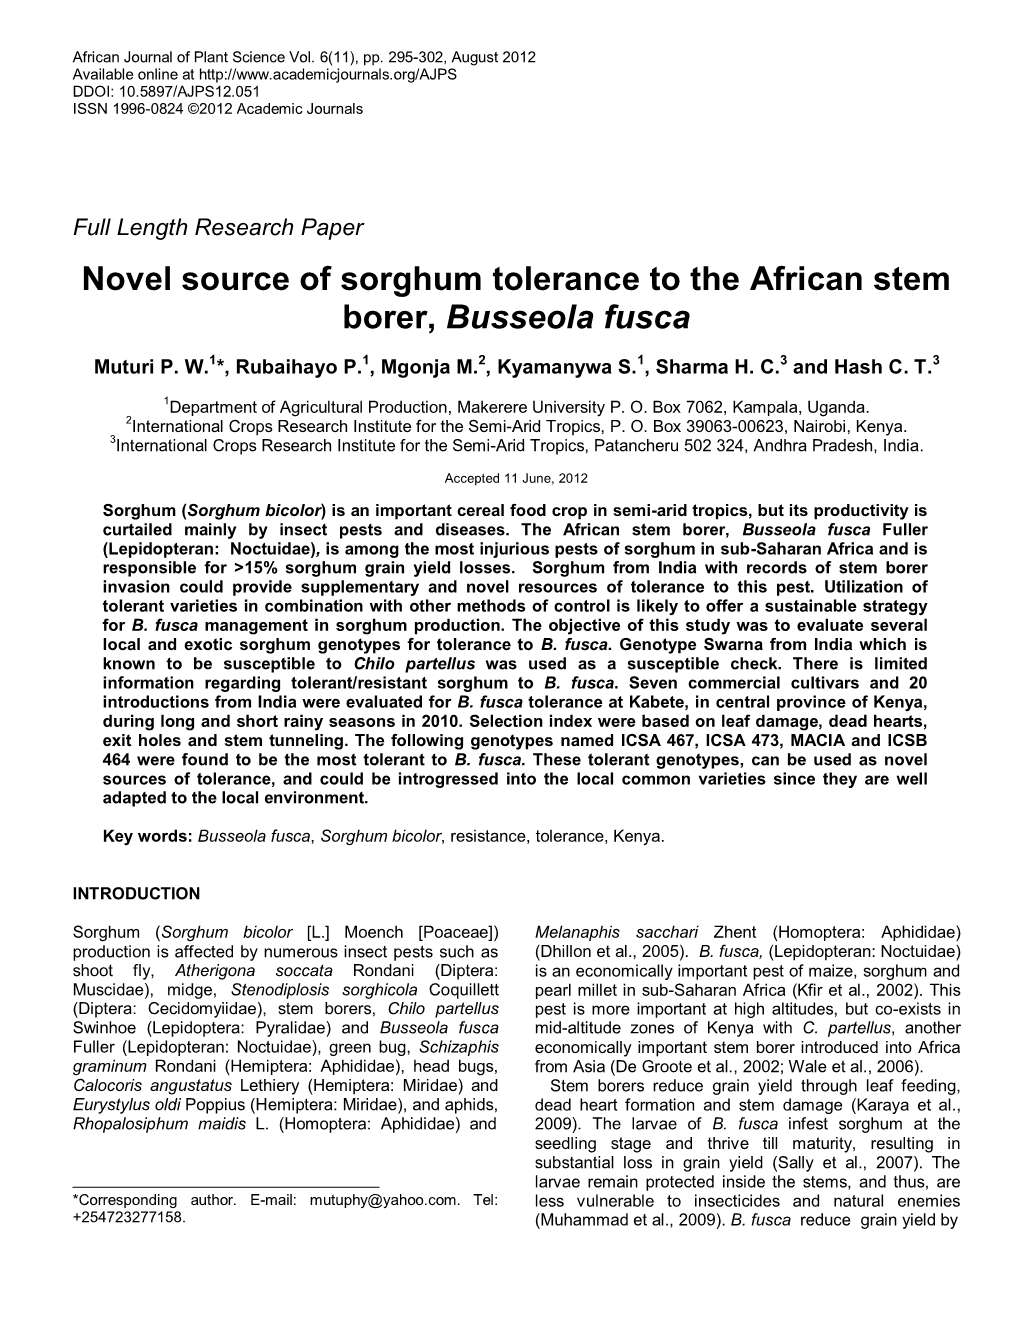 Novel Source of Sorghum Tolerance to the African Stem Borer, Busseola Fusca